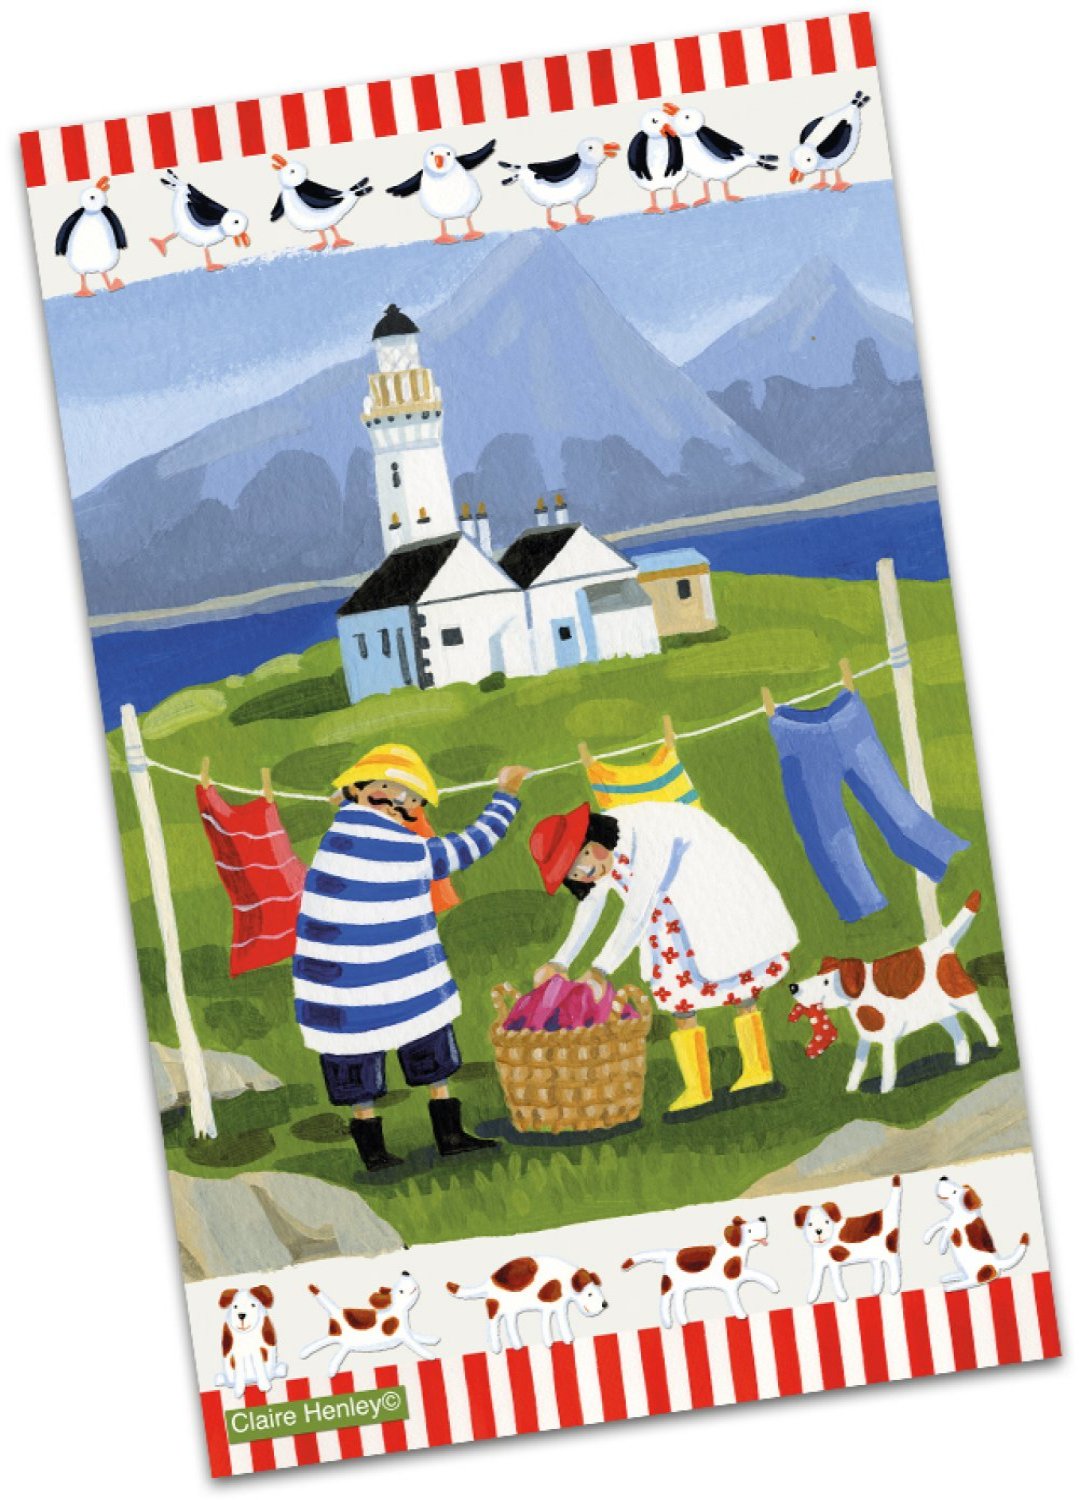 Emma Ball "Claire Henley Windy Washing Day", Pure cotton tea towel. Printed in the UK.